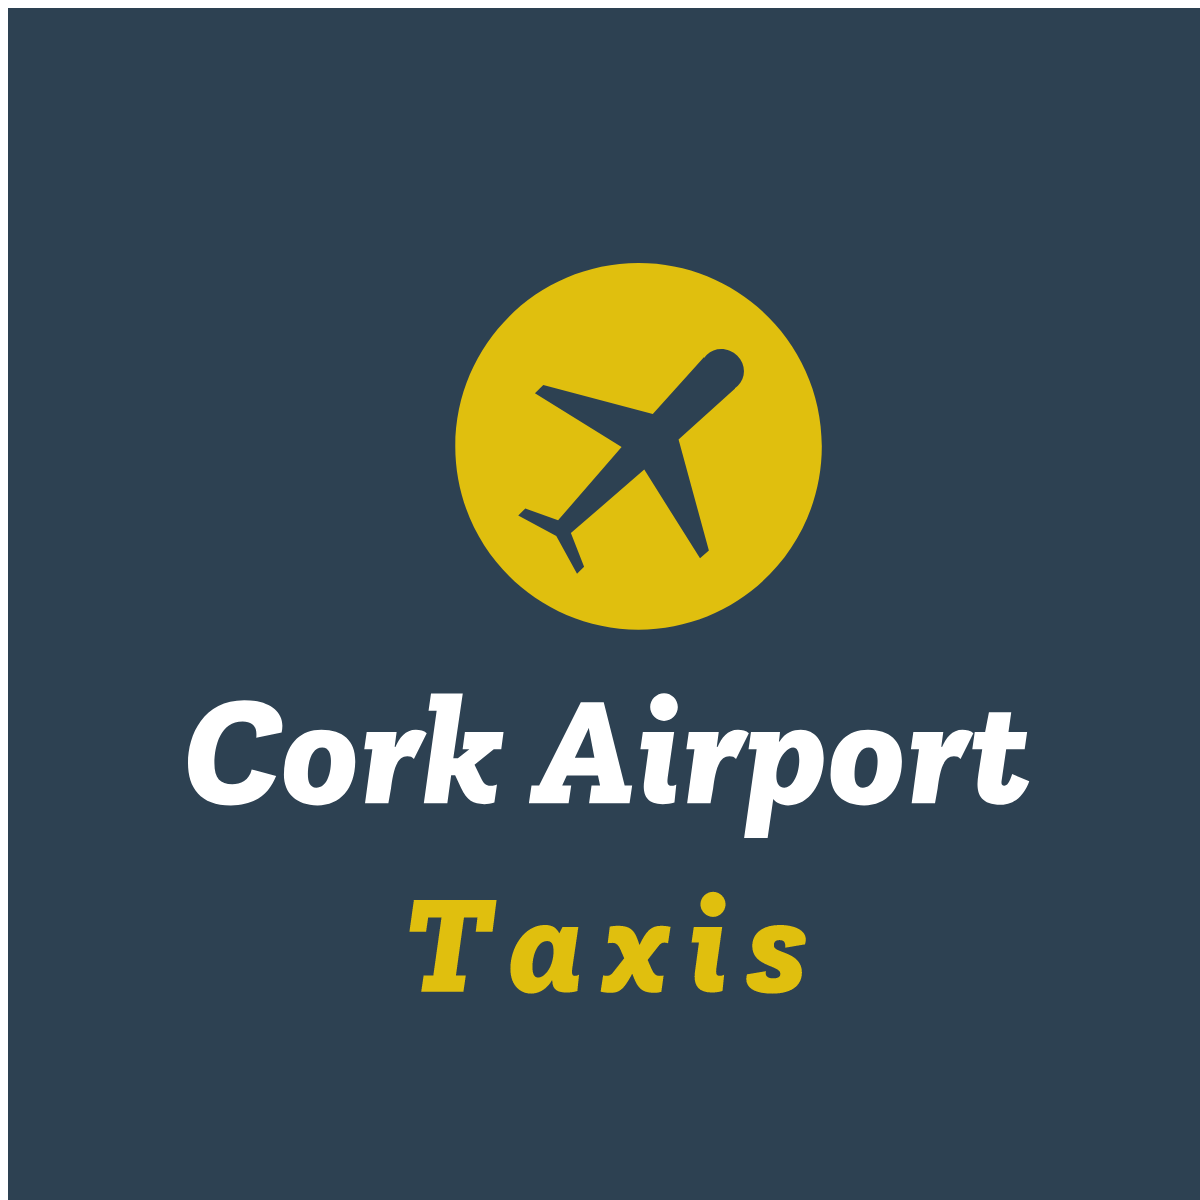 a logo for cork airport taxis with an airplane in a yellow circle .